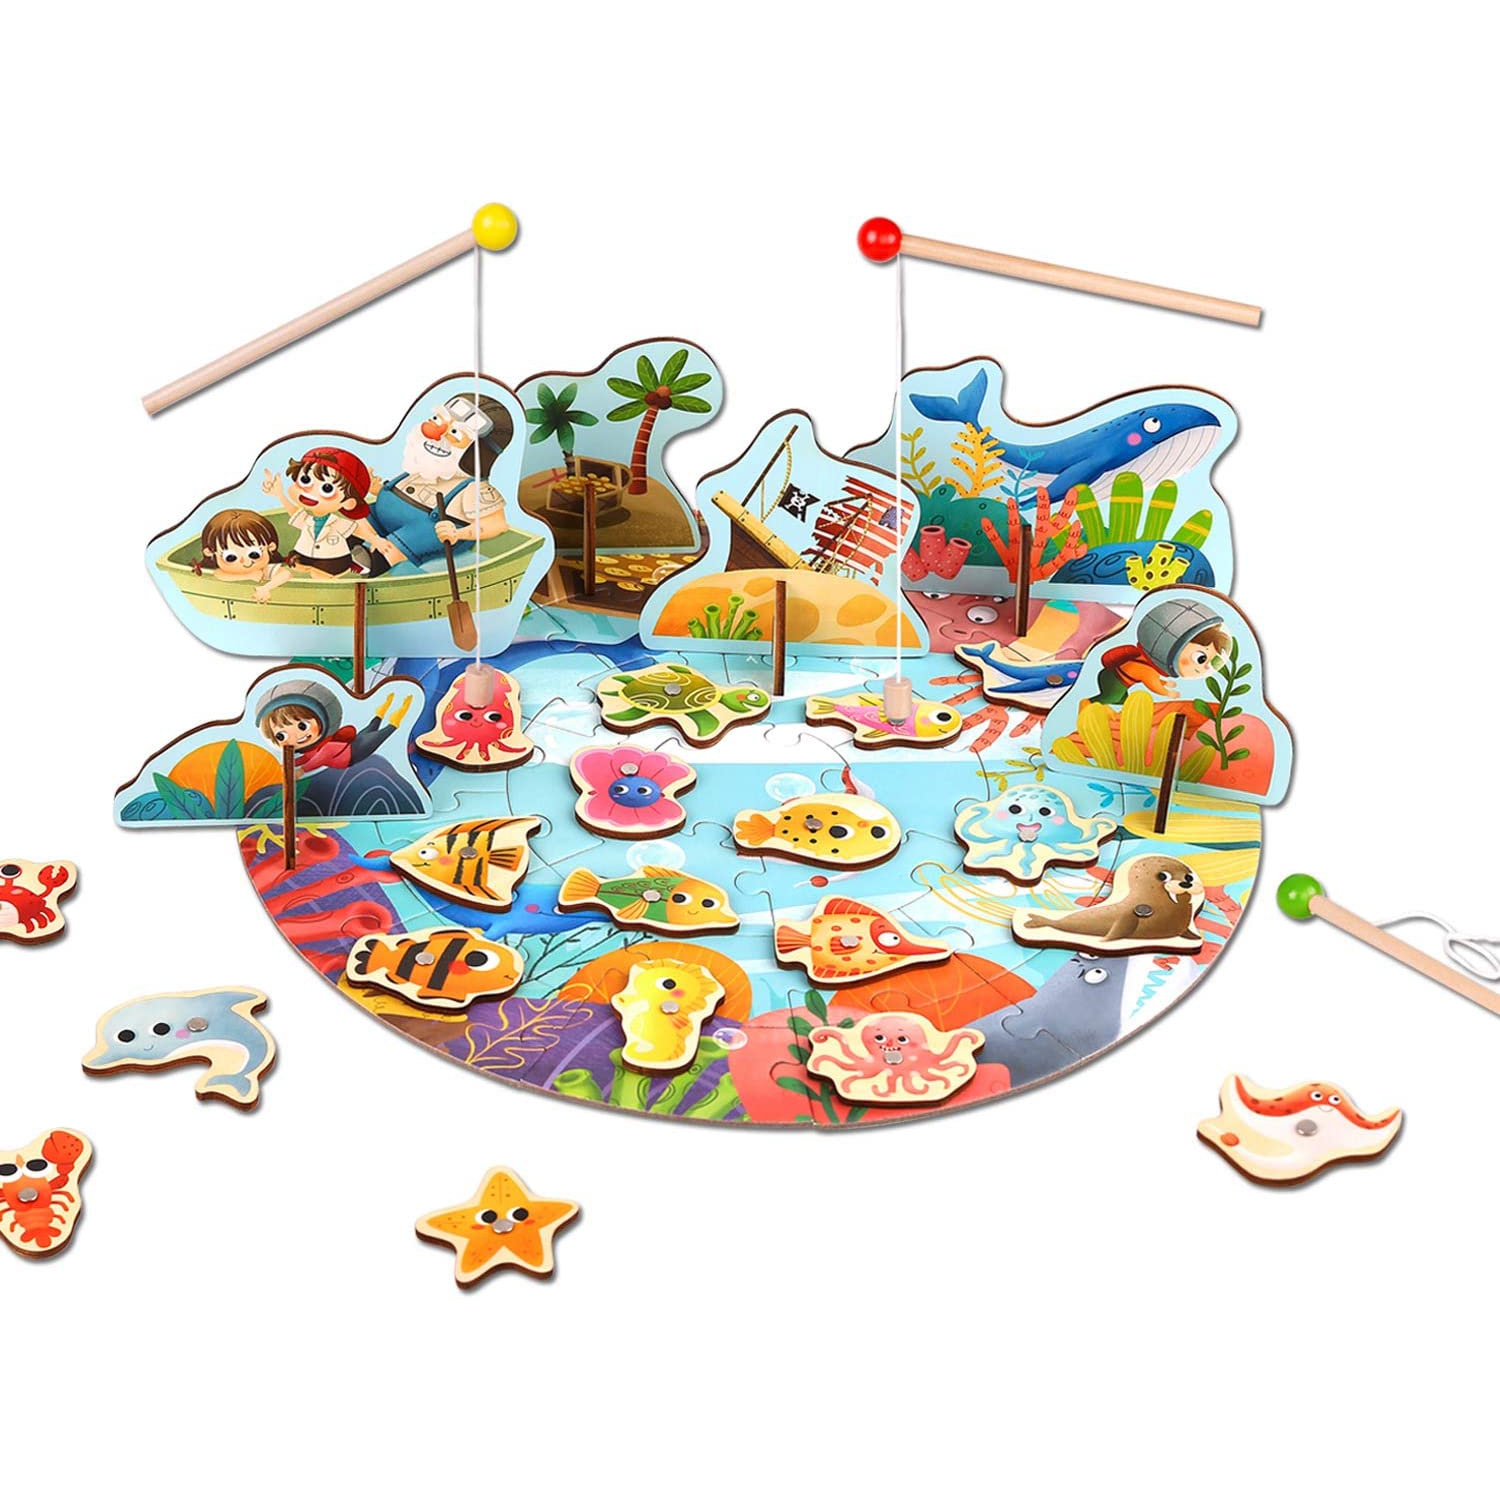 TOOKYLAND Wooden Magnetic Fishing Game - 66pcs - Includes 20 Pieces to Fish,  Jigsaw Puzzle, 3 Rods and Storage Barrel, for Kids 3 Years +